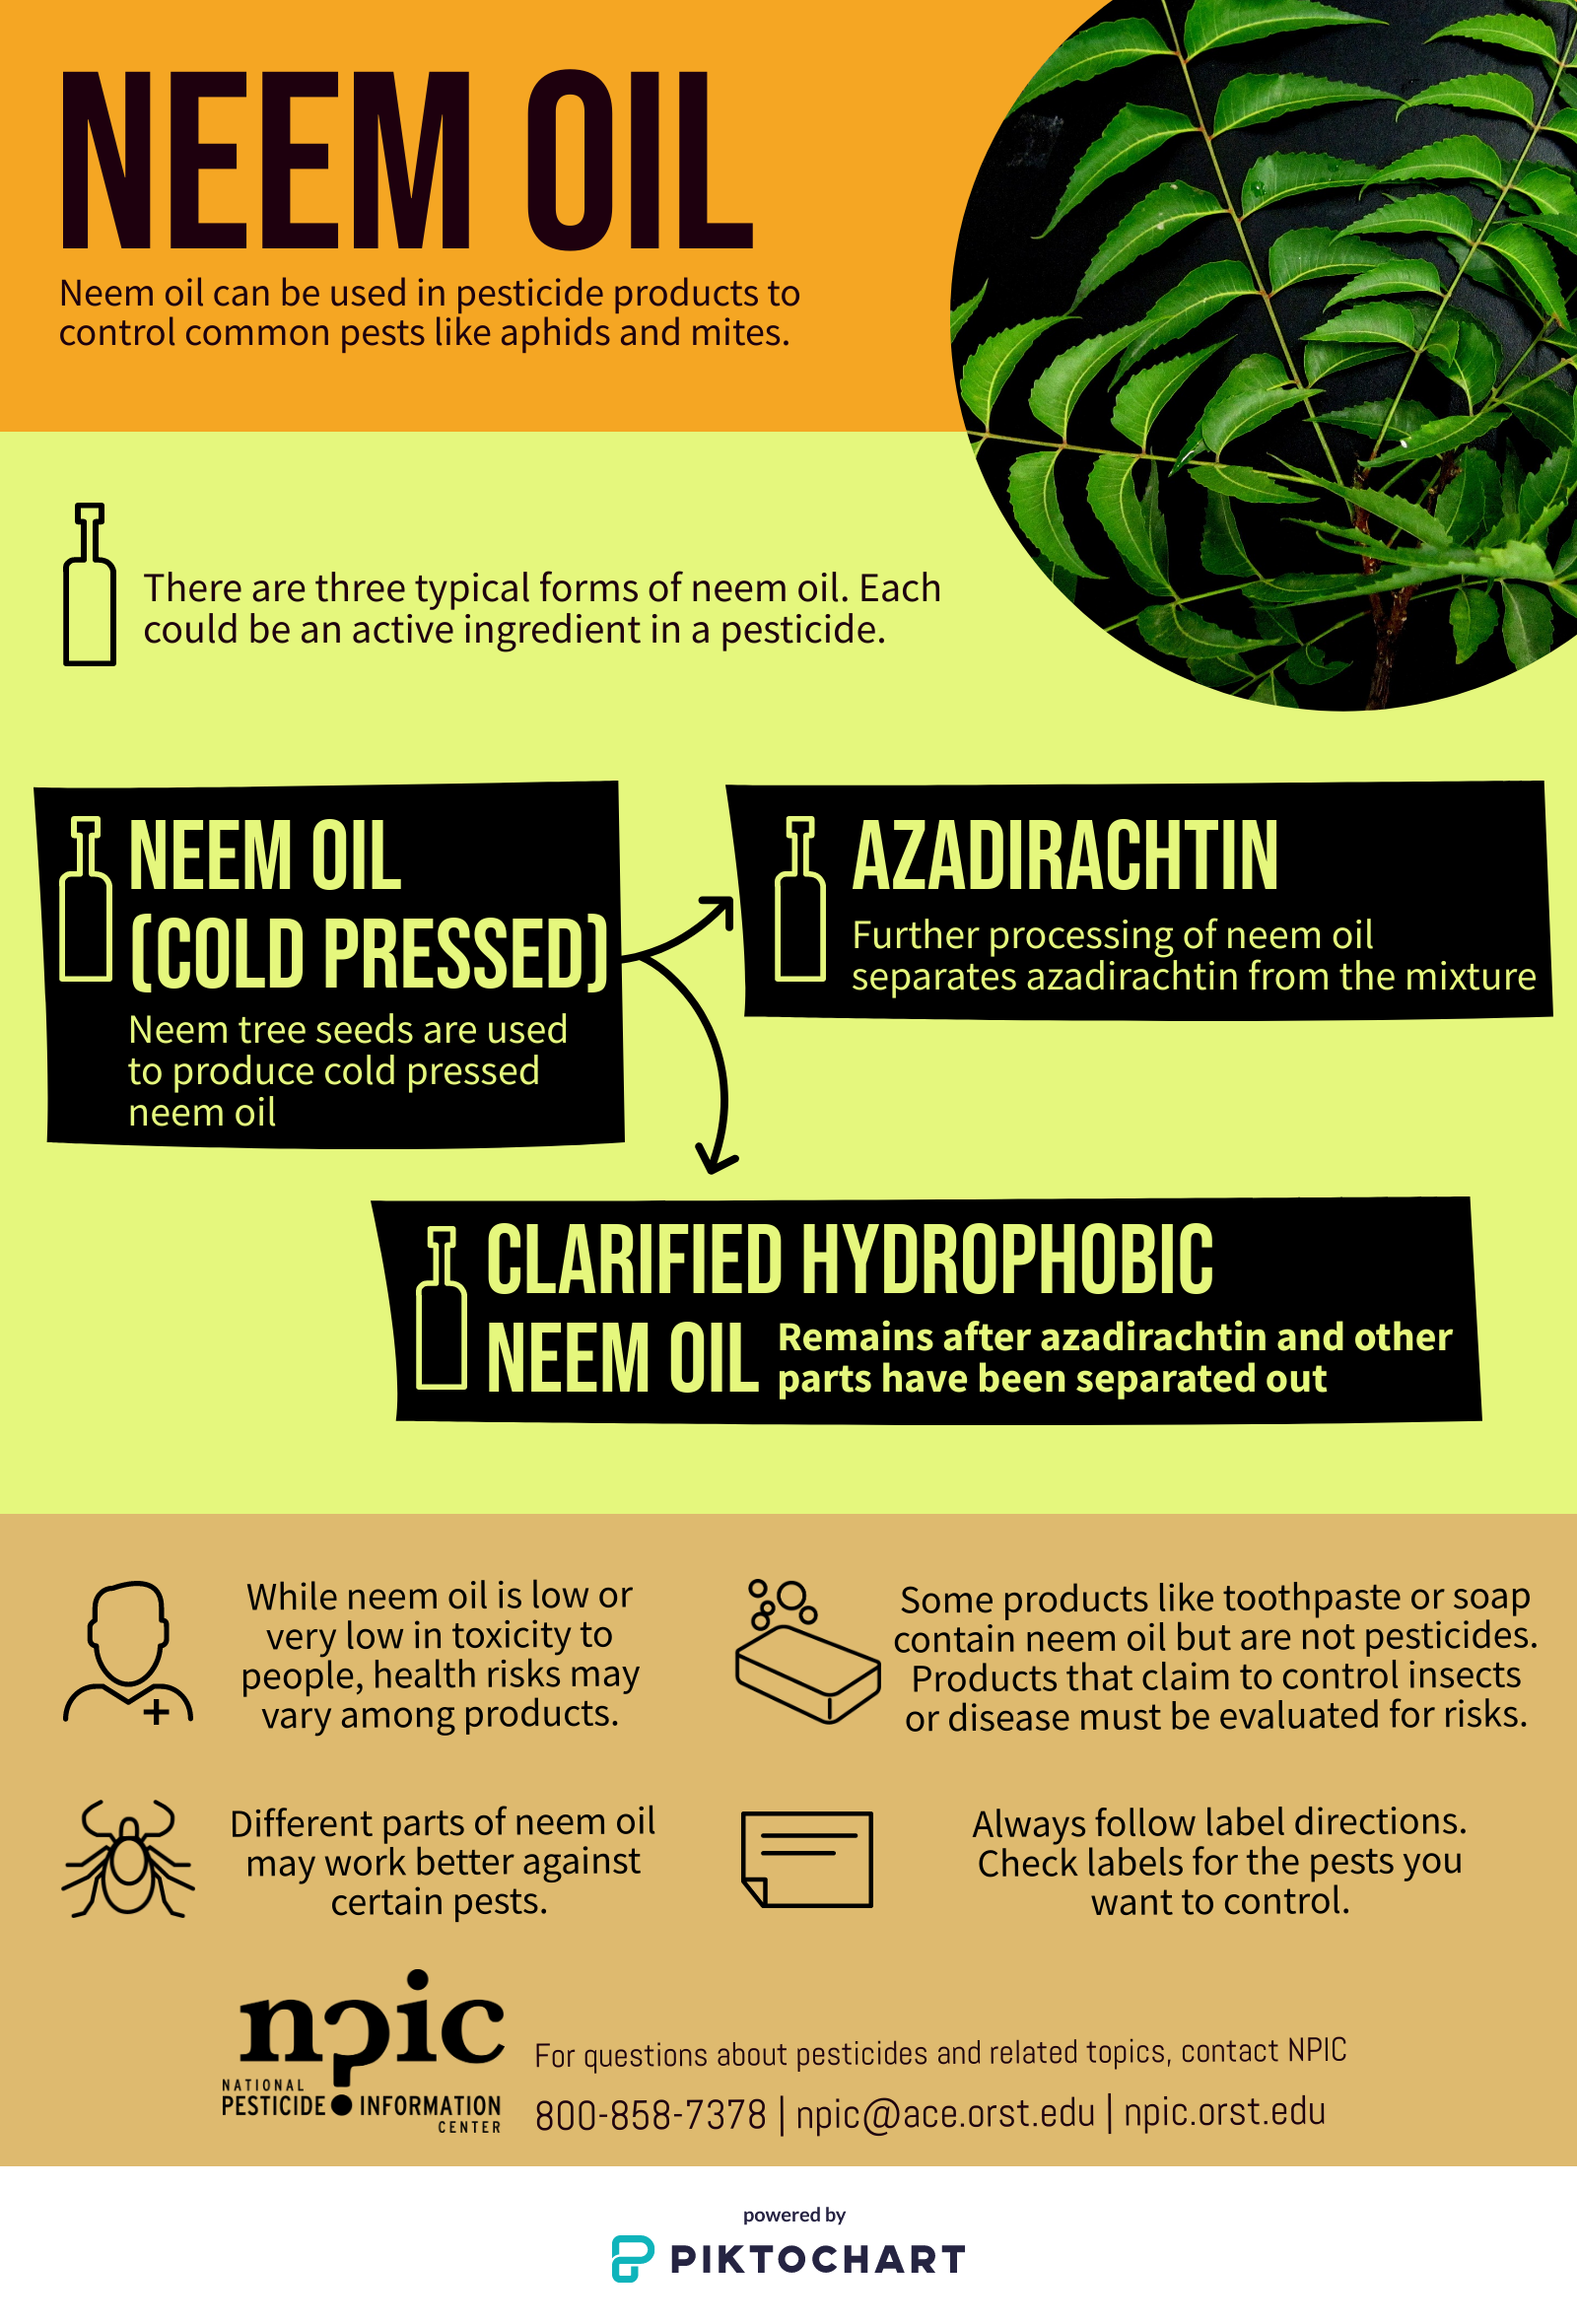 All about Potassium Soap and Neem Oil for plague control 